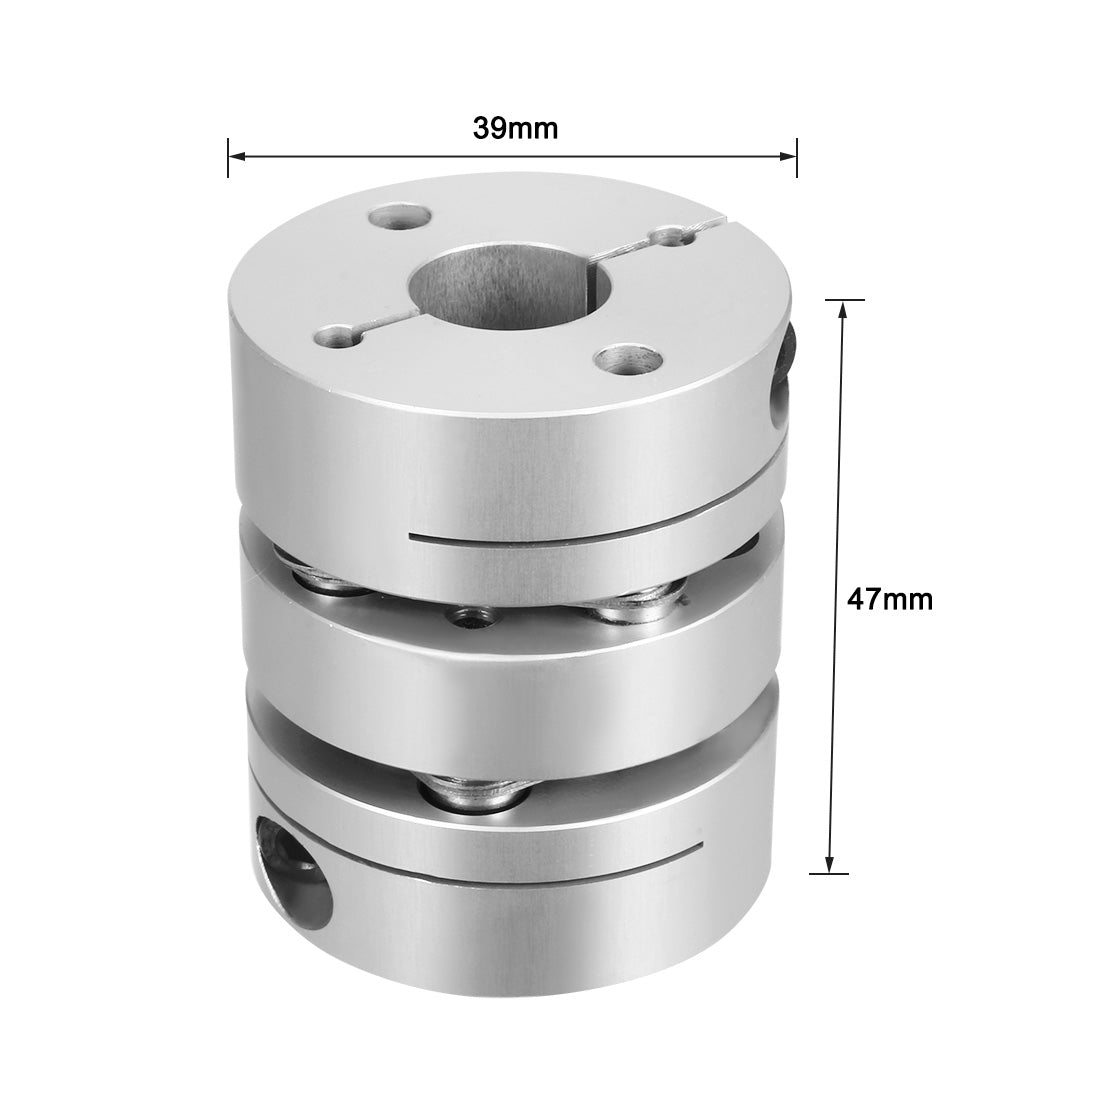 uxcell Uxcell 14mmx15mm Clamp Tight Motor Shaft 2 Diaphragm Coupling accoupler